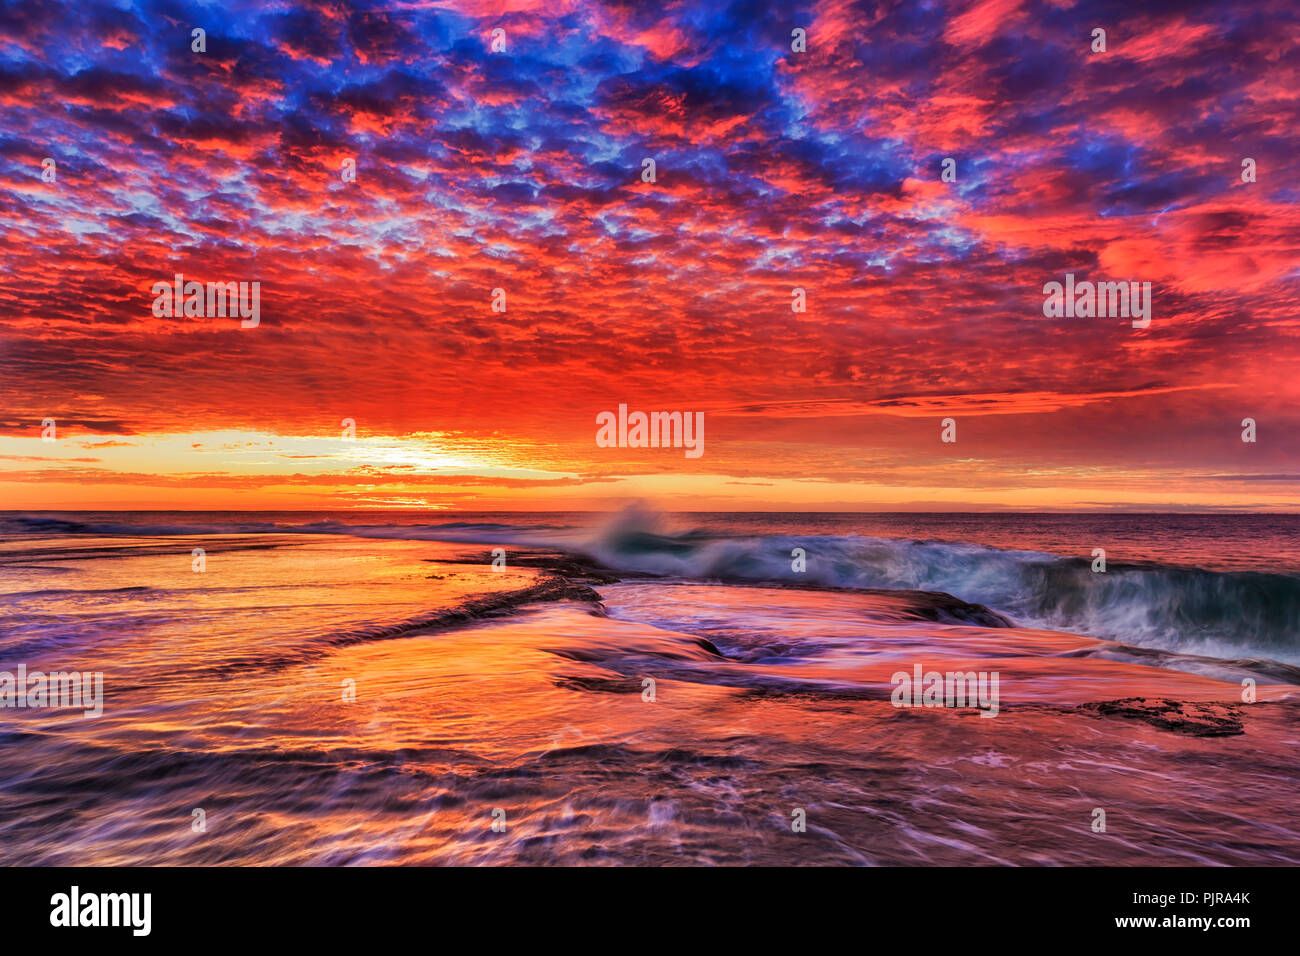 Vivid colourful sunrise over sandstone rock plateau at Mona Vale beach of Australia, Sydney, with stormy Pacific ocean waves attacking shore. Stock Photo